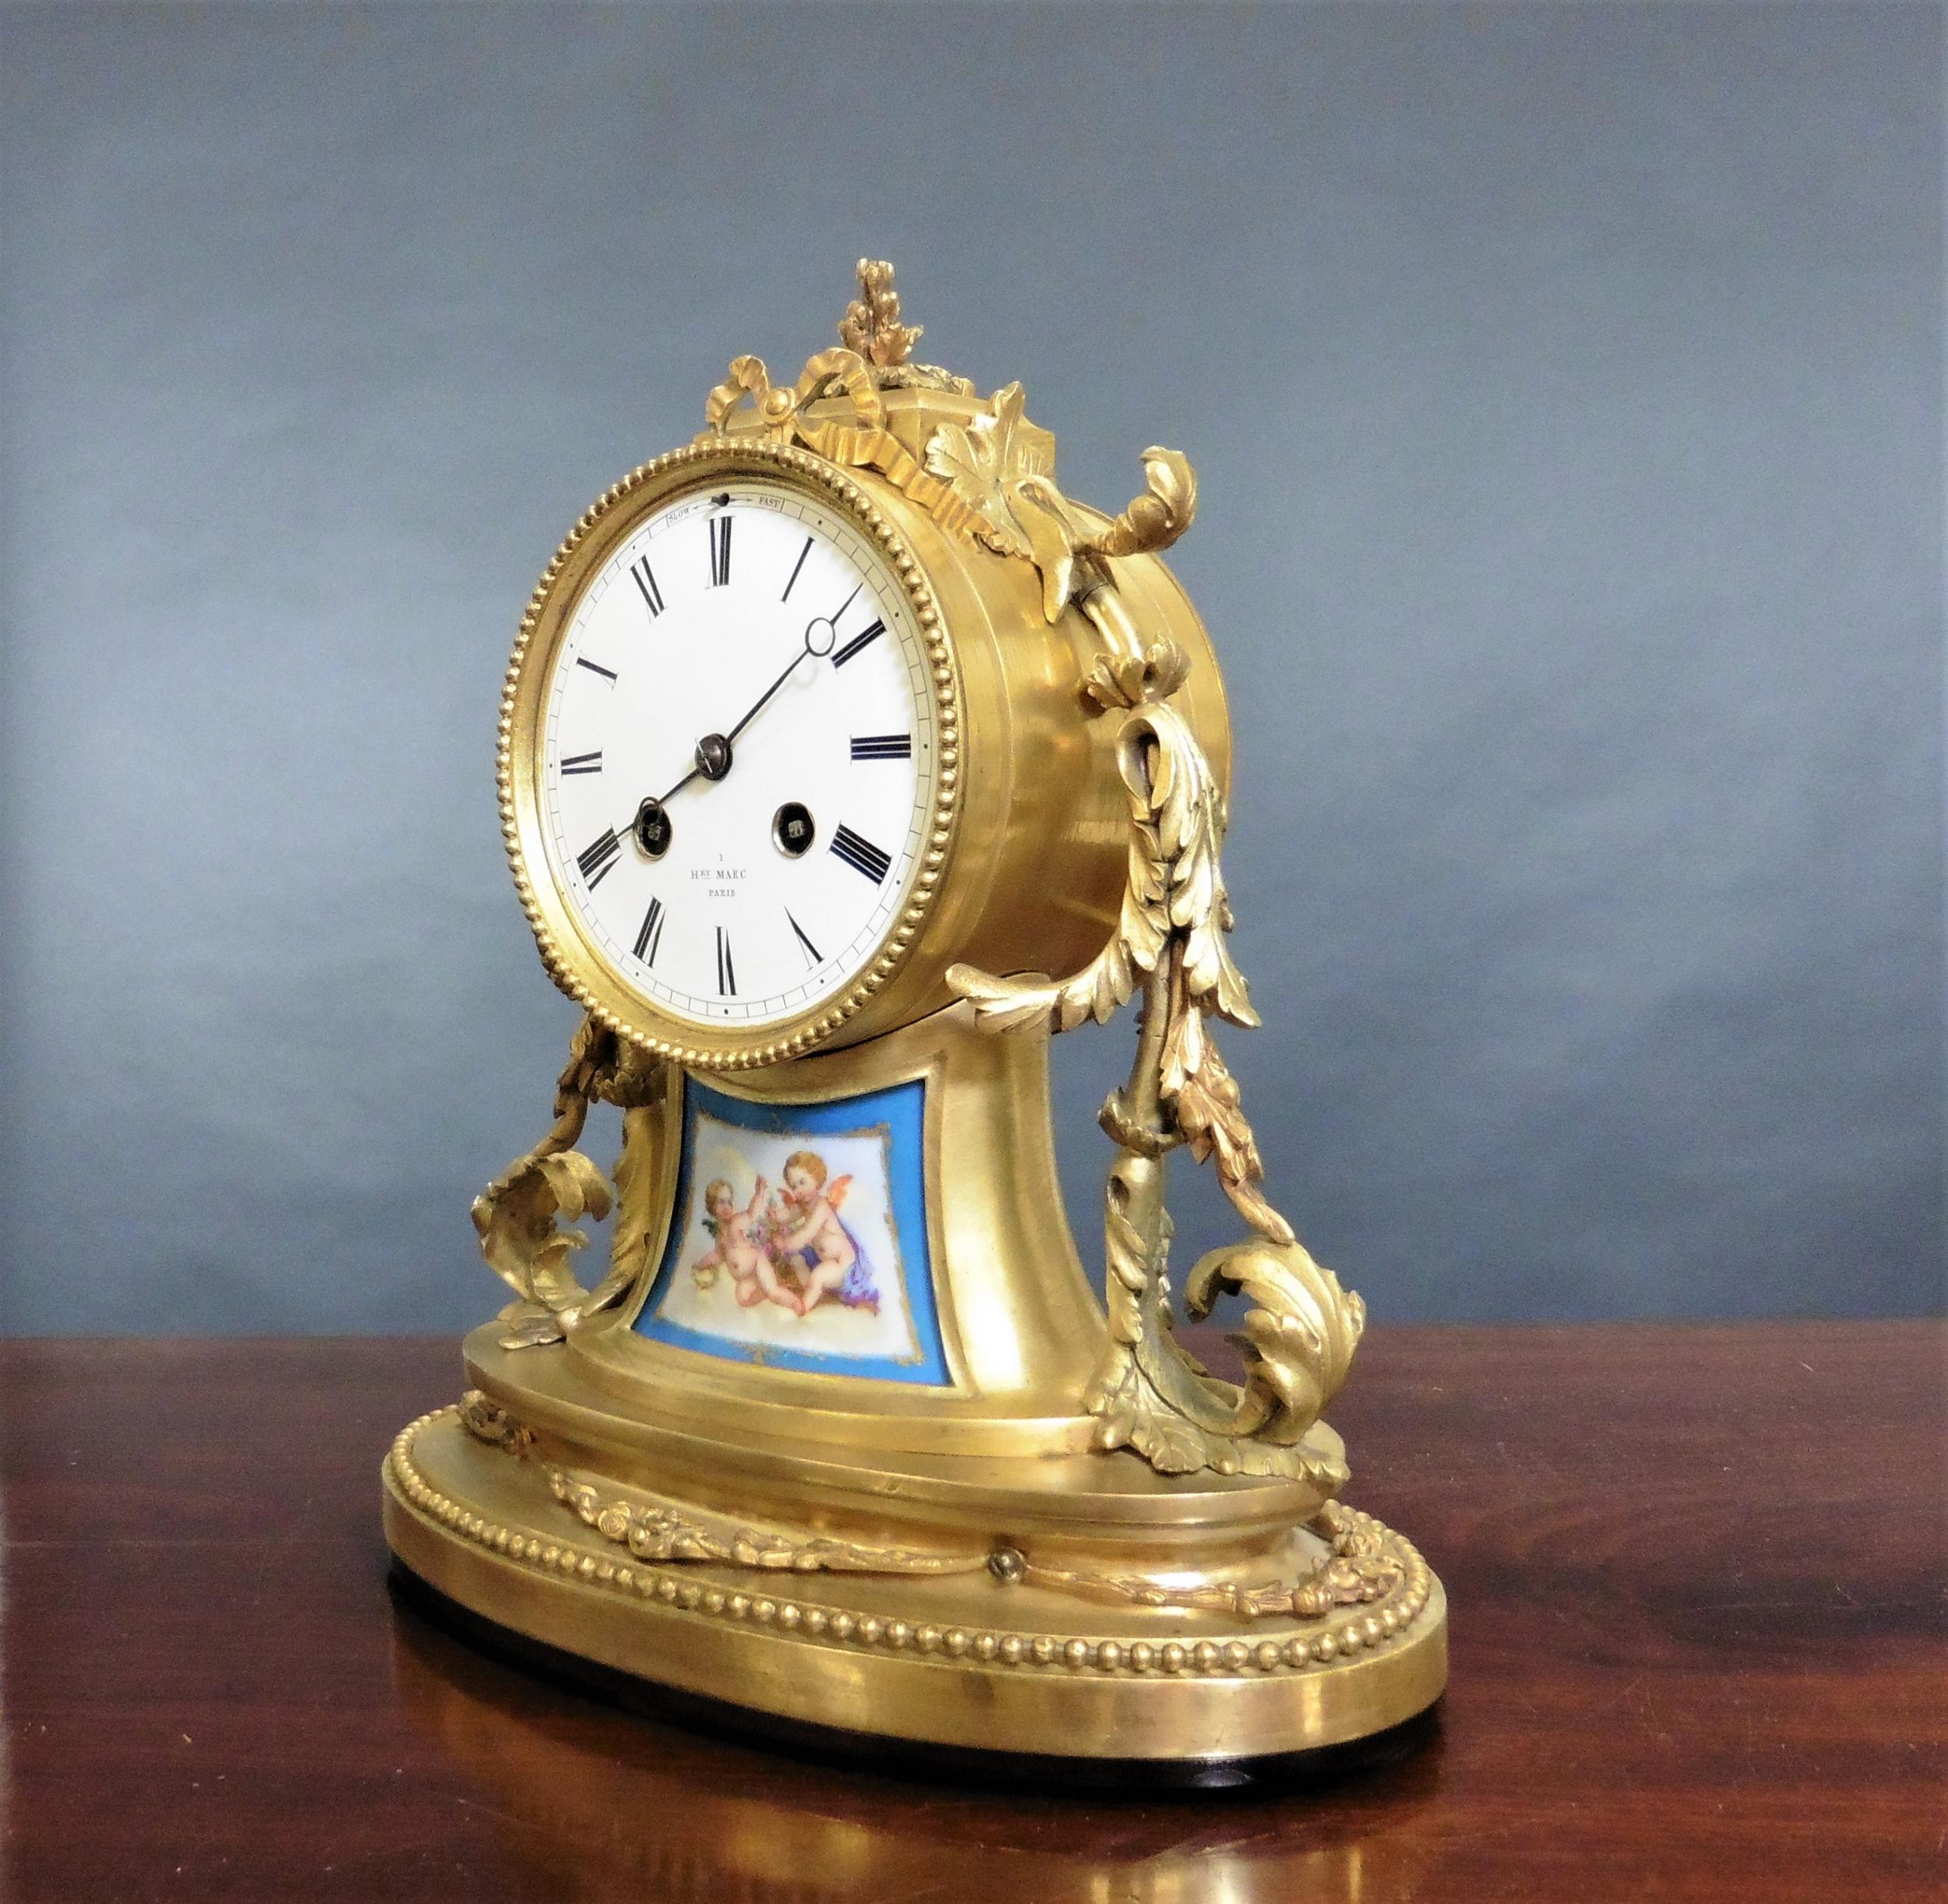 French Ormolu and porcelain mantel clock

French ormolu mantel clock standing on a beaded oval base and resting on a mahogany plinth.

Floral swag decoration to either side of the dial.

The enamel dial with Roman numerals, original ‘blued’ steel